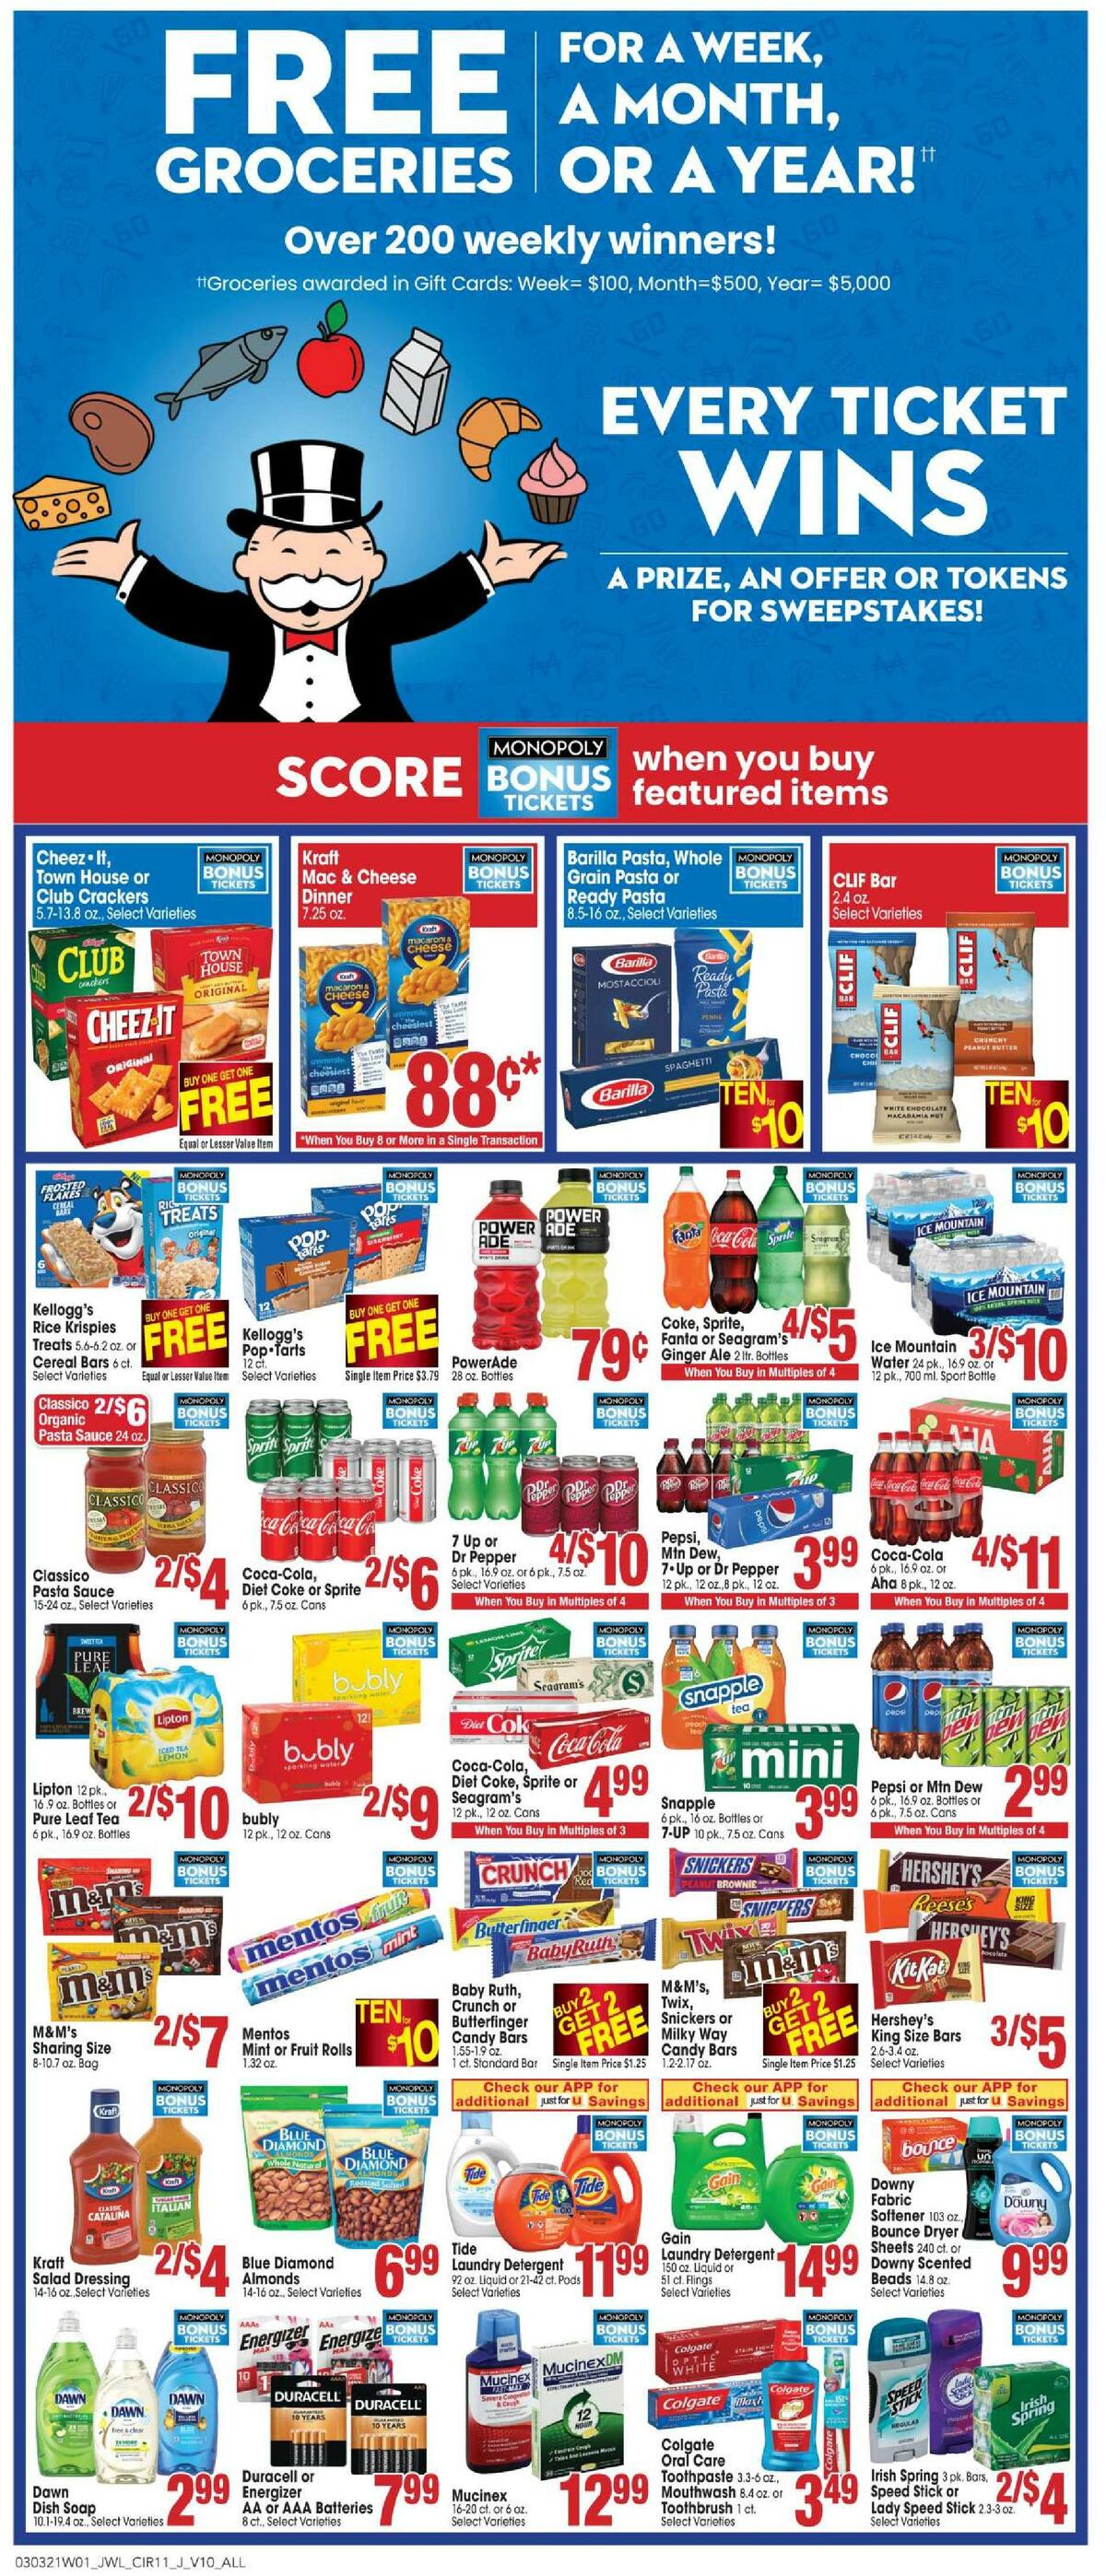 Jewel Osco Weekly Ad from March 3